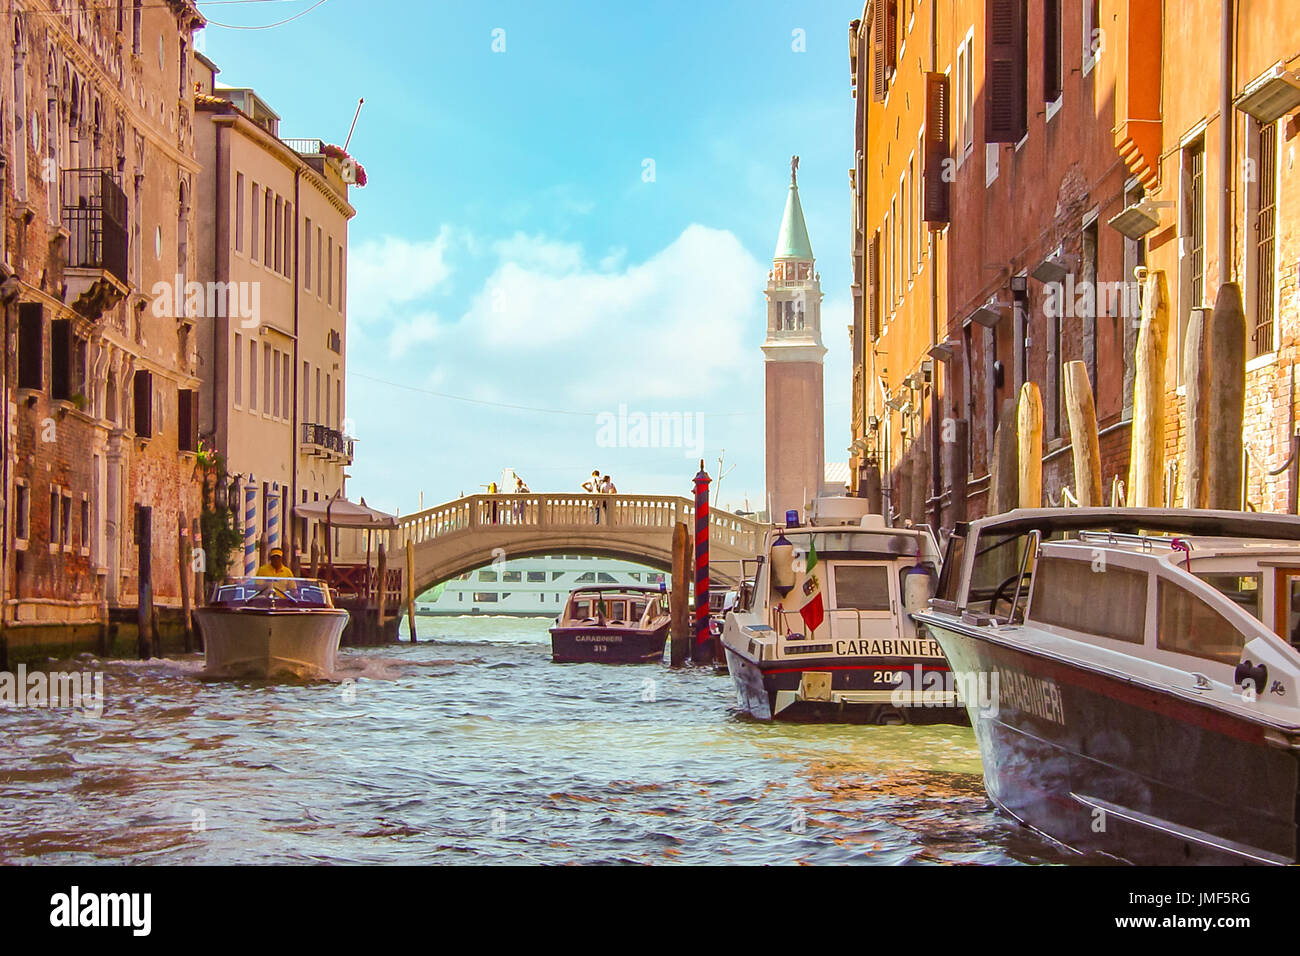 Muted colors and soft focus image of a beautiful day in Venice with the Bell Tower and bridge with couple on it and police boats in the lagoon Stock Photo